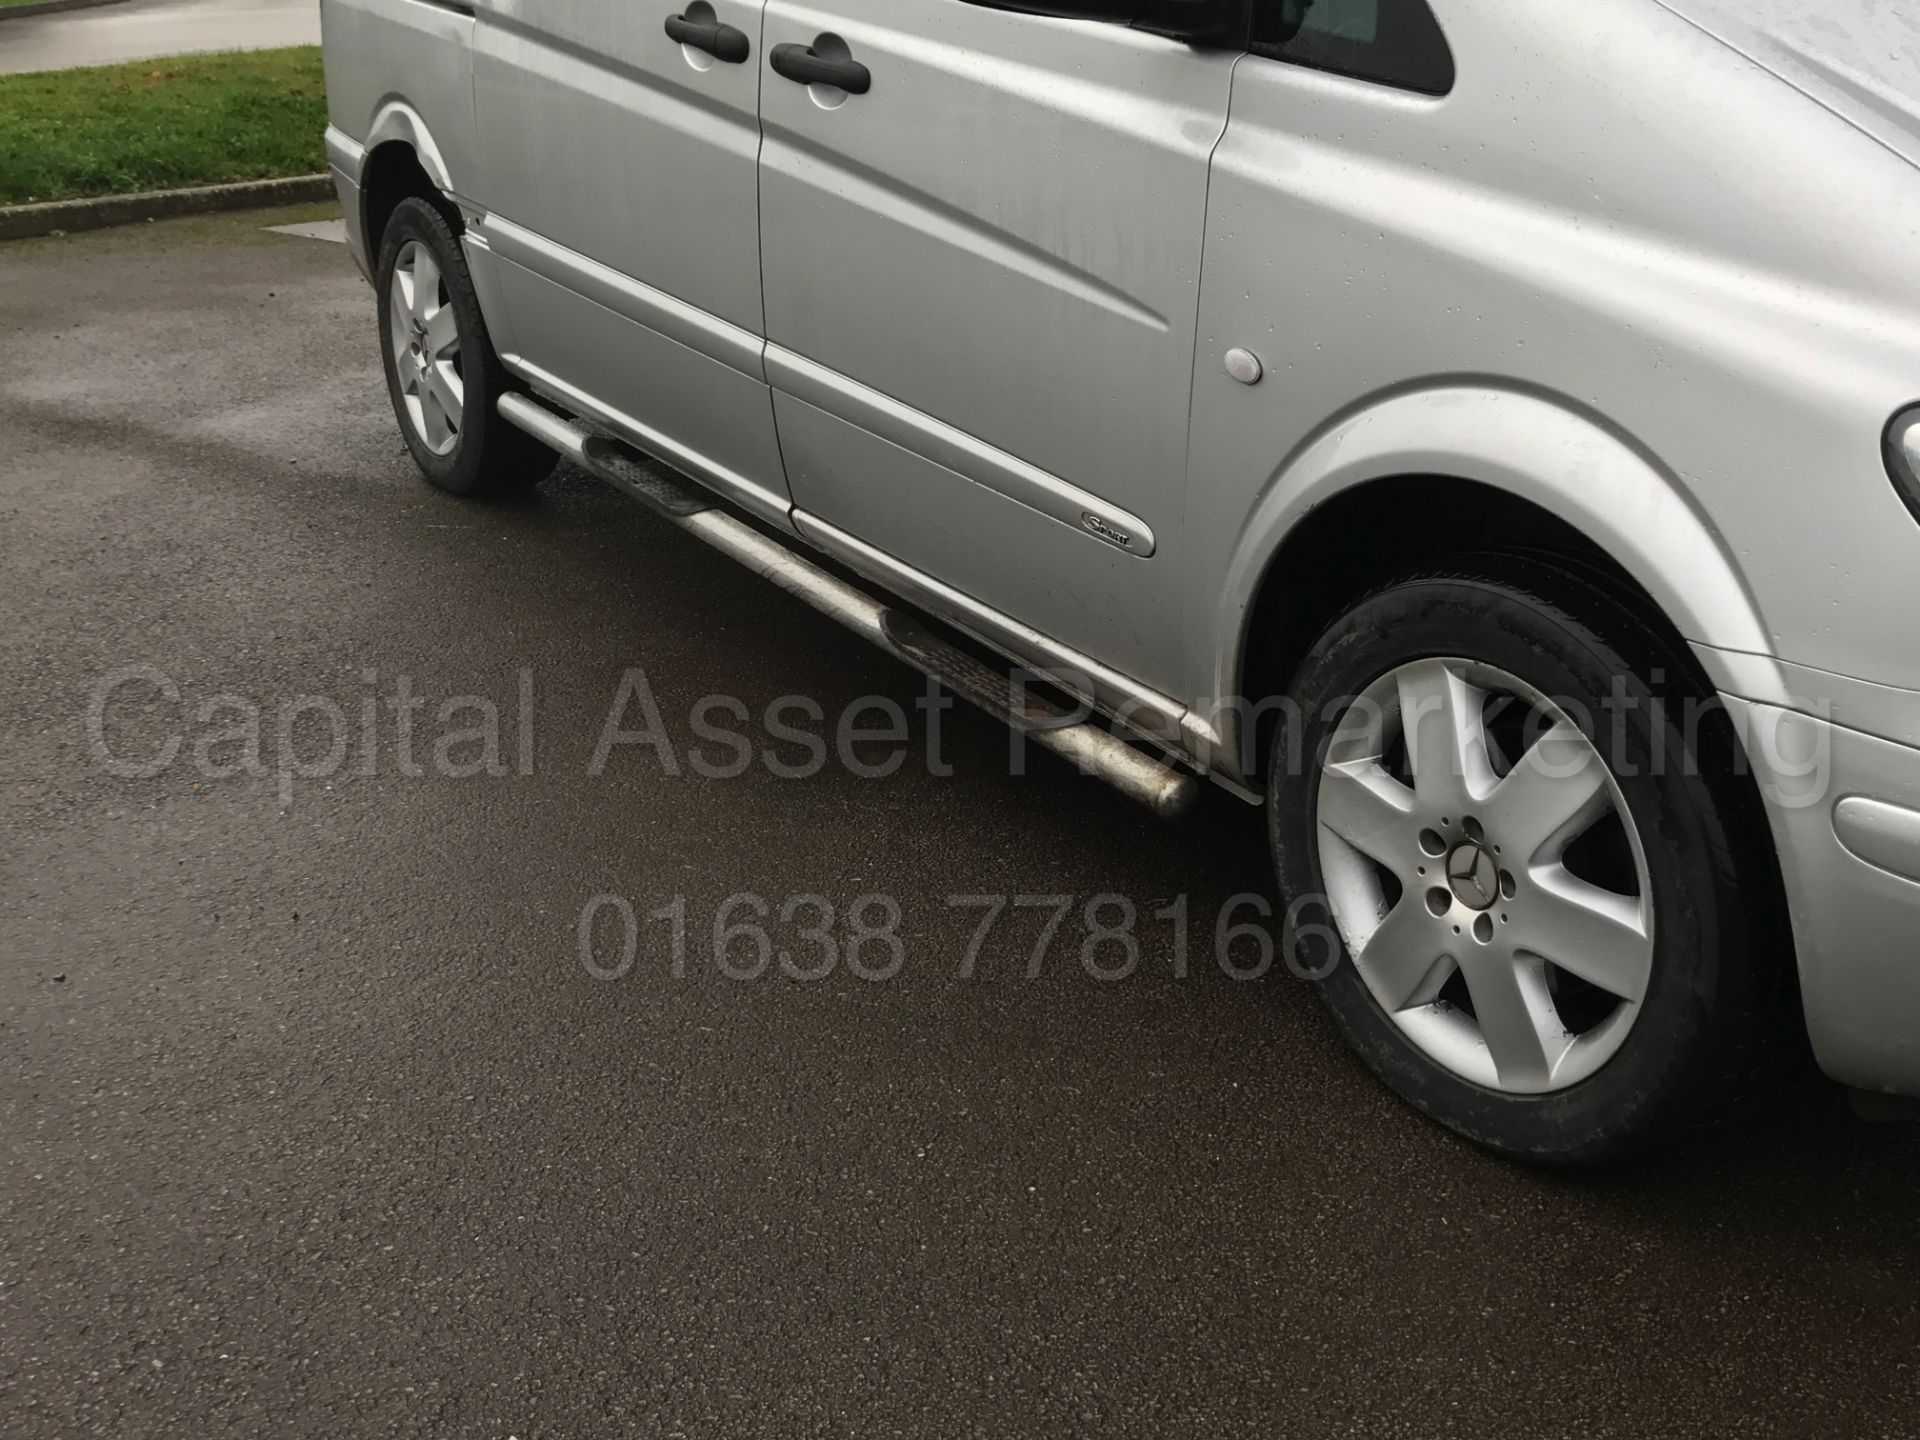 MERCEDES VITO *SPORT* '5 SEATER DUELINER' (2010 - 10 REG) '2.1 CDI - 150 BHP - 6 SPEED' **AIR CON** - Image 12 of 35